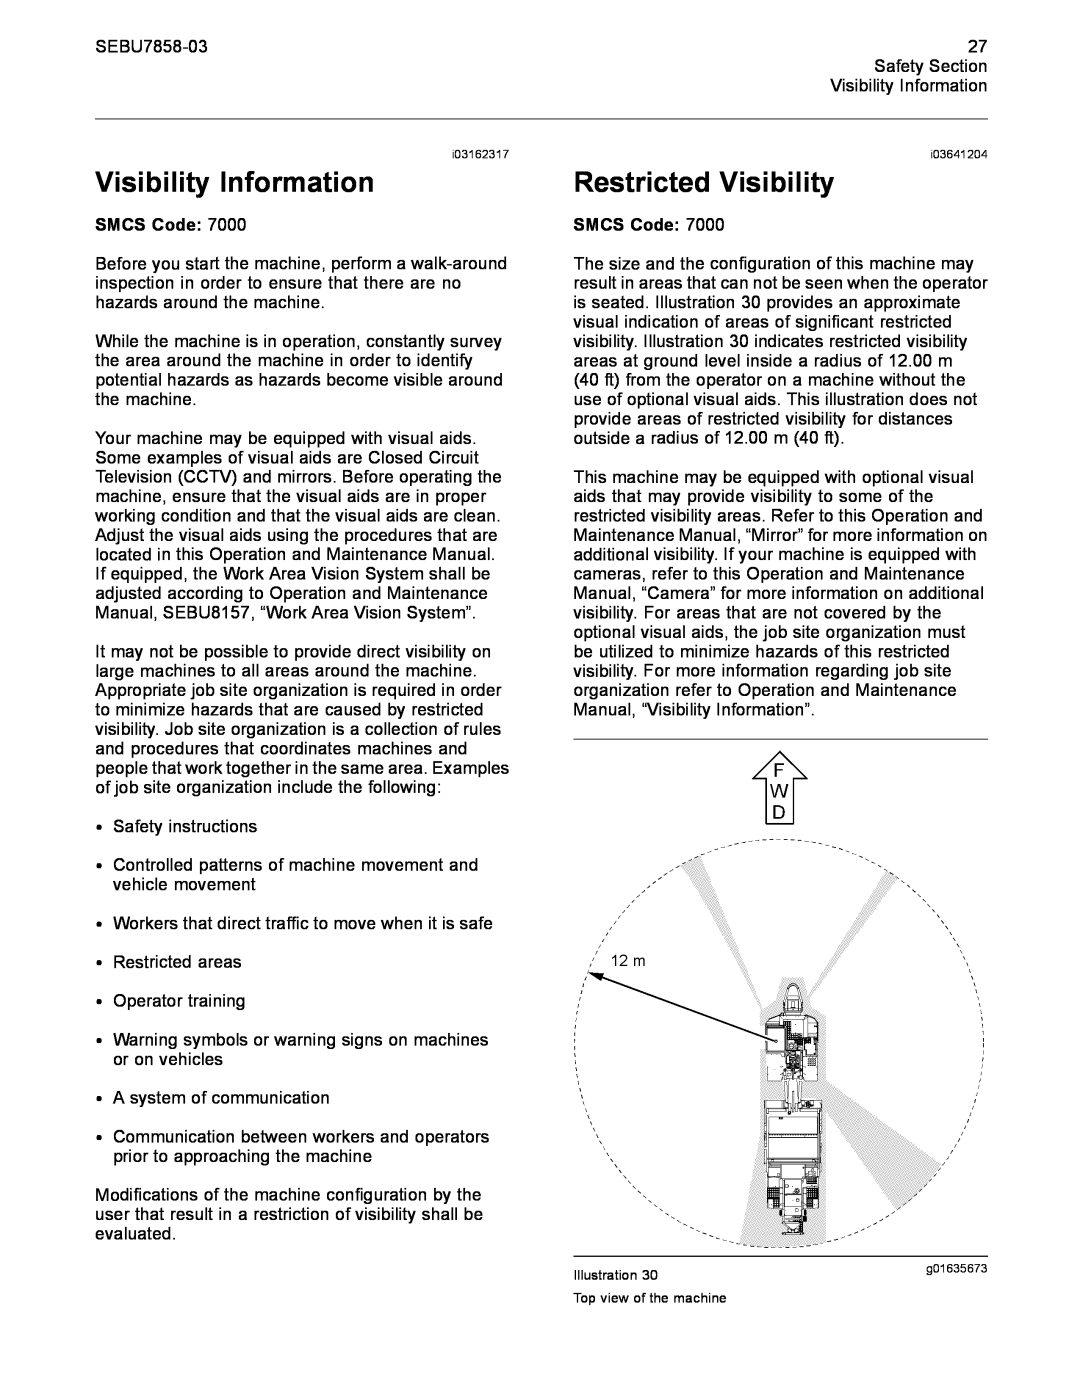 CAT 627G manual Visibility Information, Restricted Visibility 